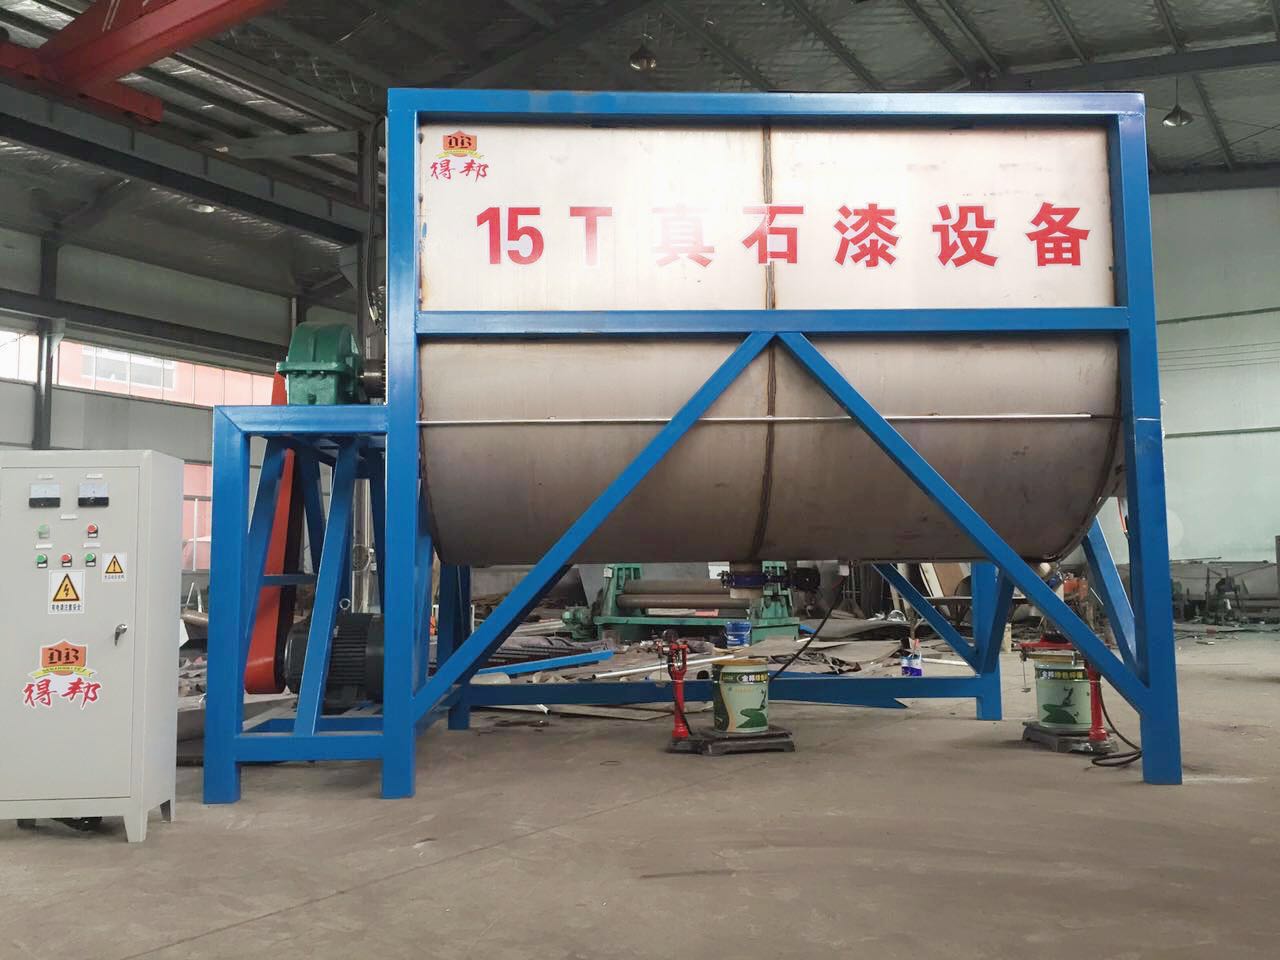 15 tons of automatic real stone paint production equipment